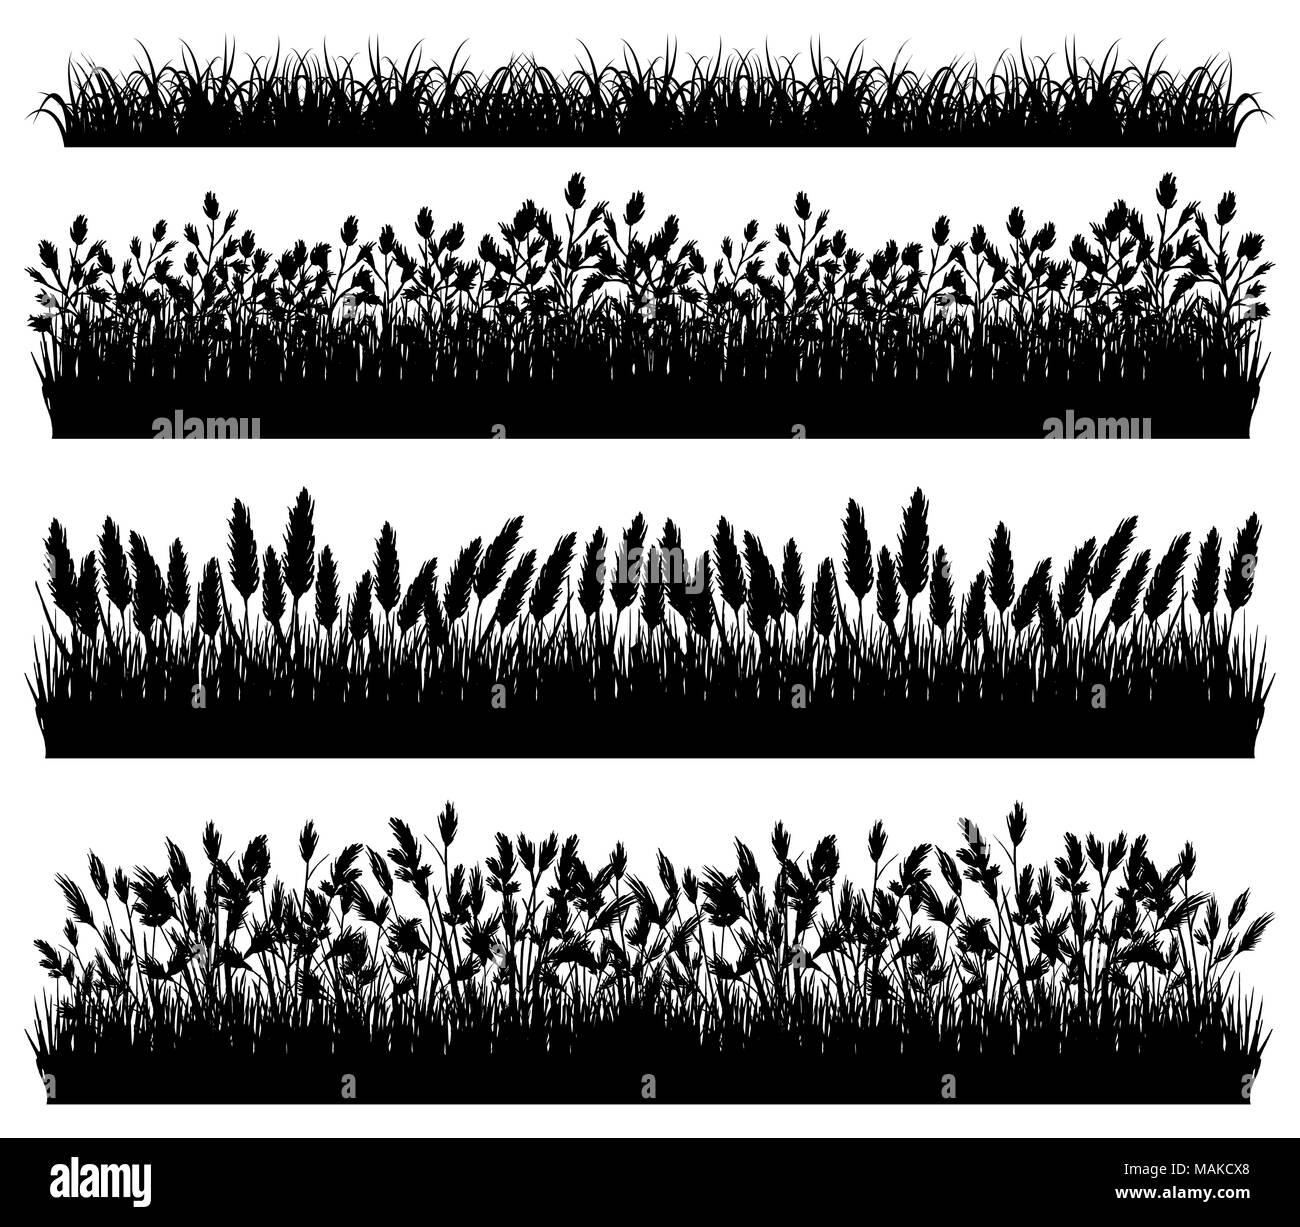 Grass silhouette borders set isolated on white background vector Stock Vector